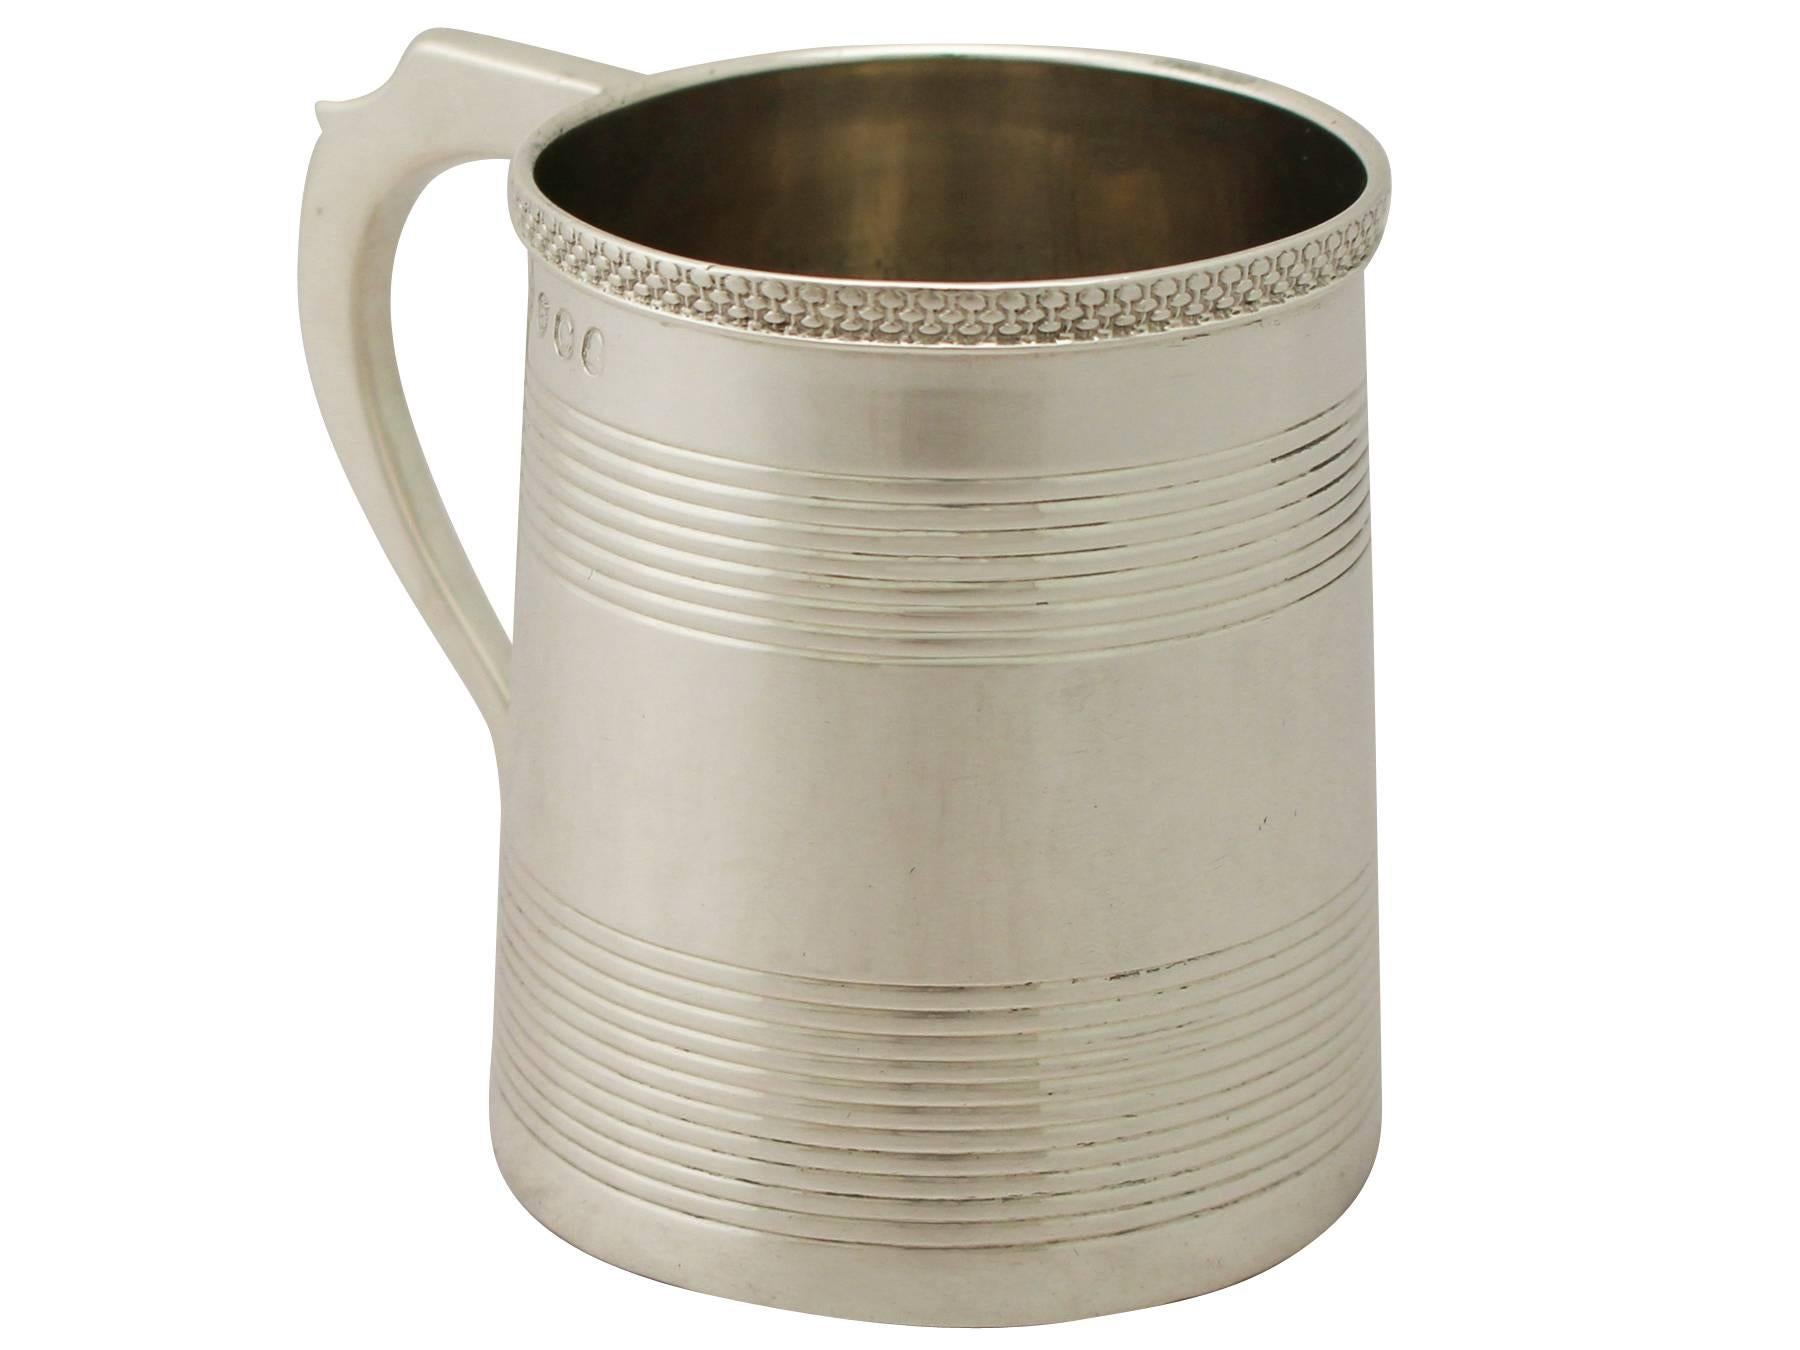 A fine and impressive antique Georgian English sterling silver christening mug, an addition to our christening gifts silverware collection.

This fine antique George III sterling silver christening mug has a plain tapering cylindrical form.

The